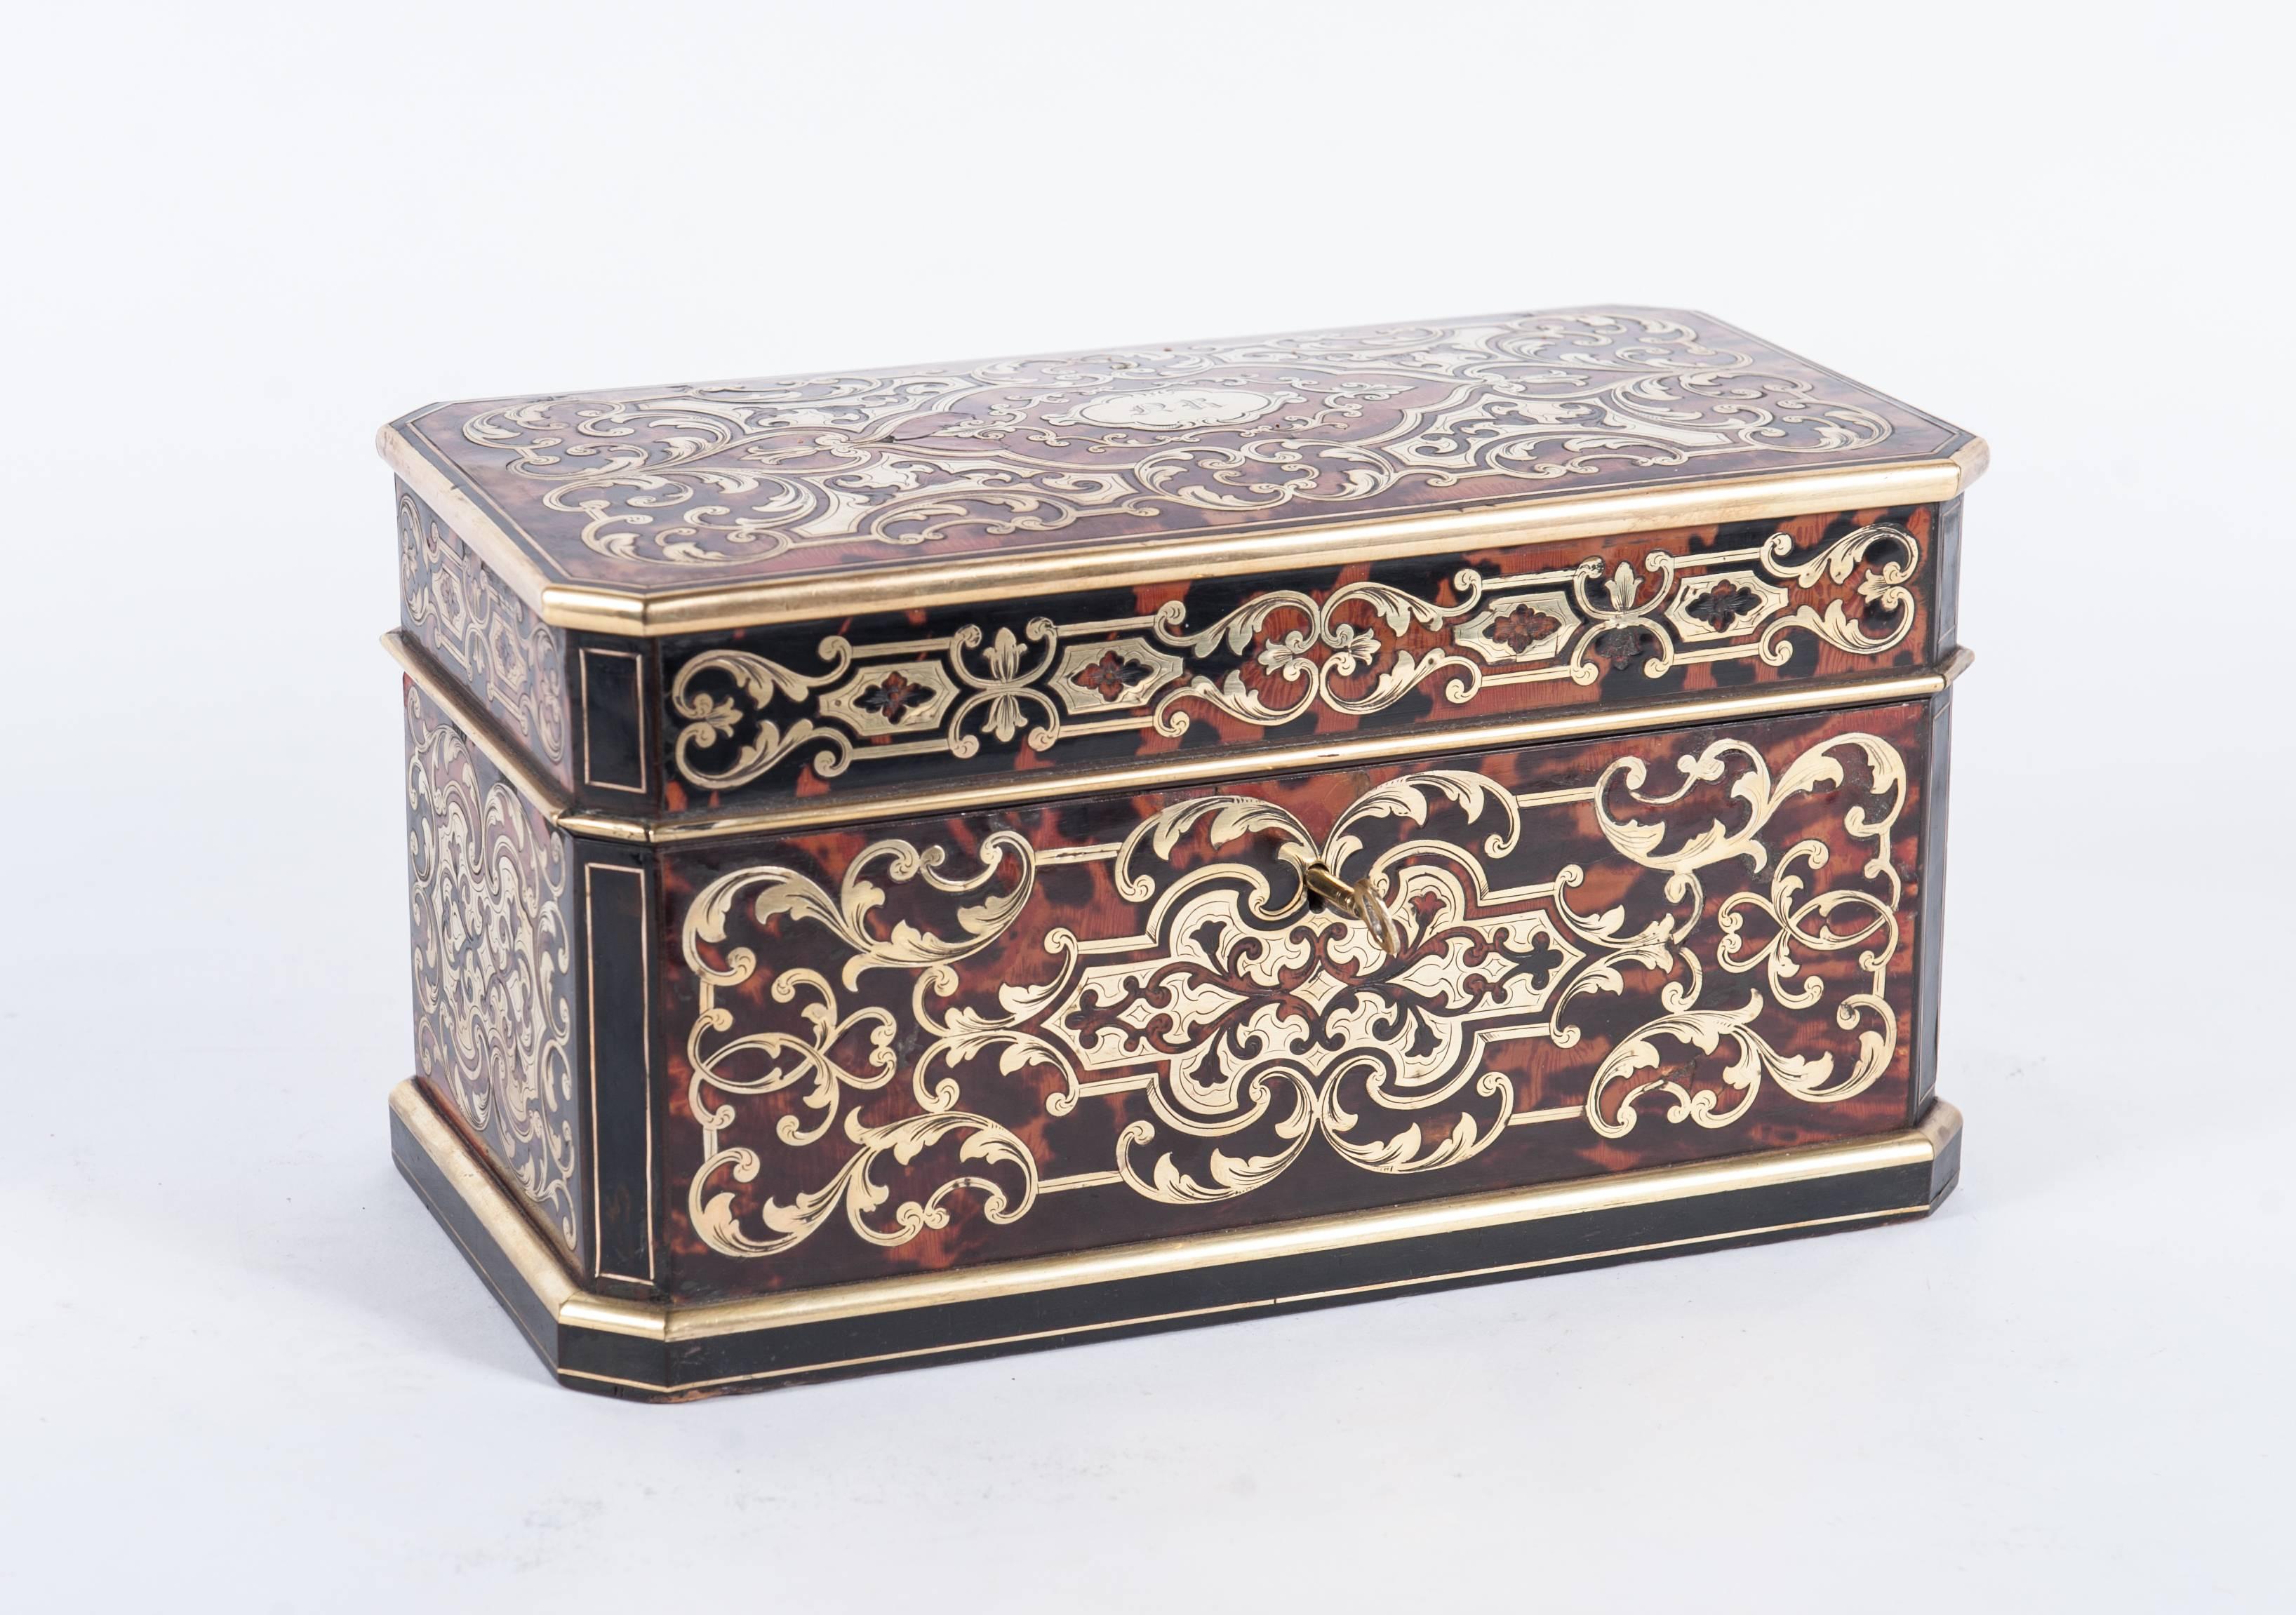 A nice boulle inlaid tea caddy, French circa 1860 in perfect condition. Tea caddy has original tea compartments with covers inside.

